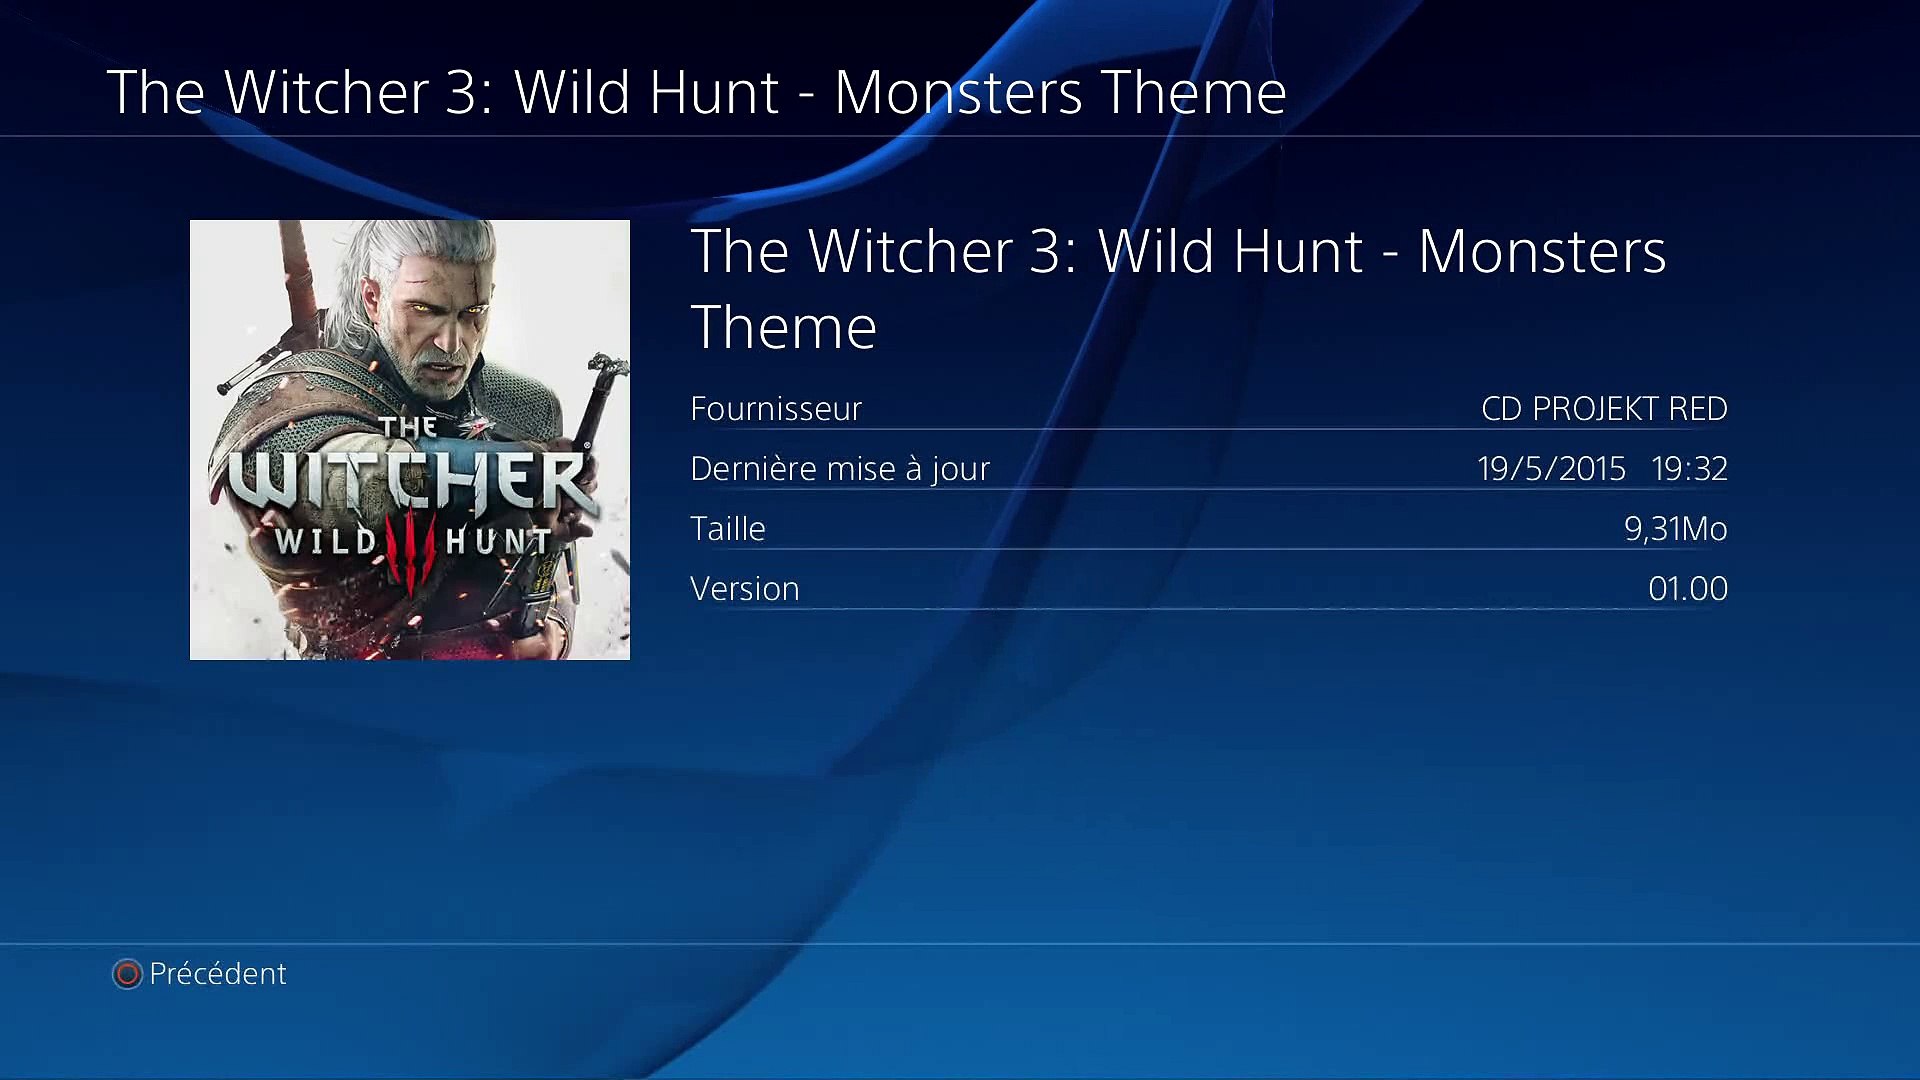 PS4 THEME] The Witcher 3 Wild Hunt – Monsters - Vidéo Dailymotion